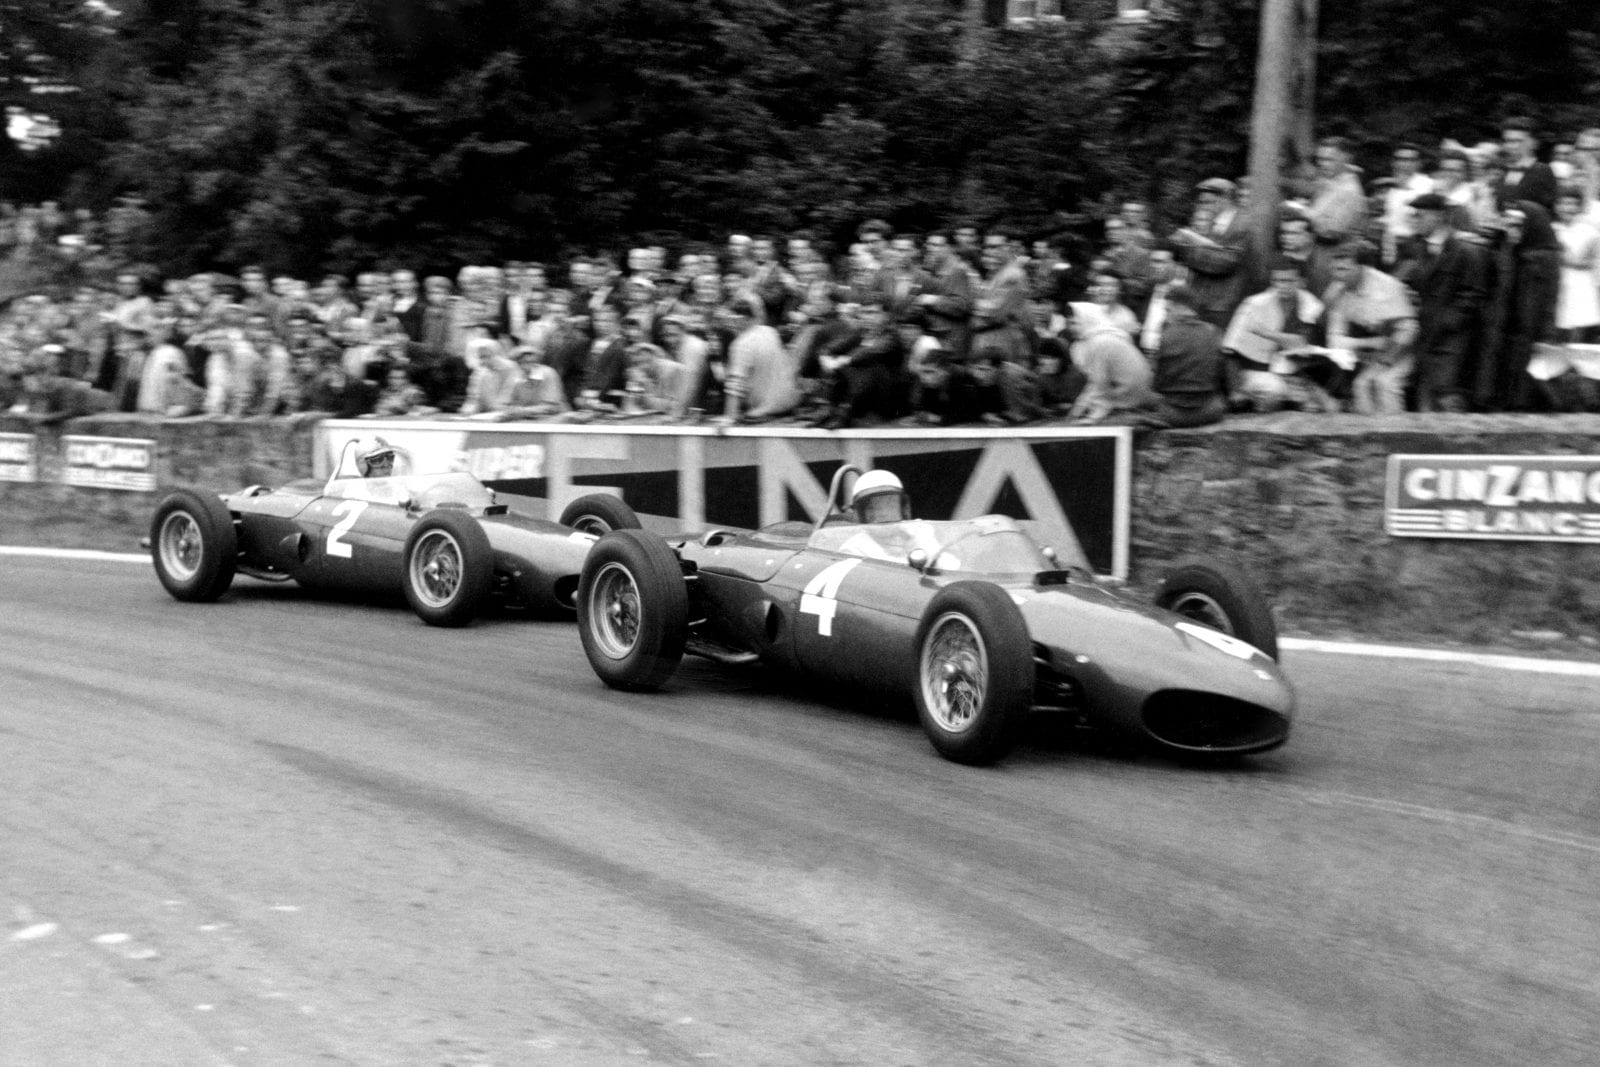 Phil Hill leads Wolfgang von Trips (Ferrari 156) into La Source Hairpin. They finished in 1st and 2nd respectively.